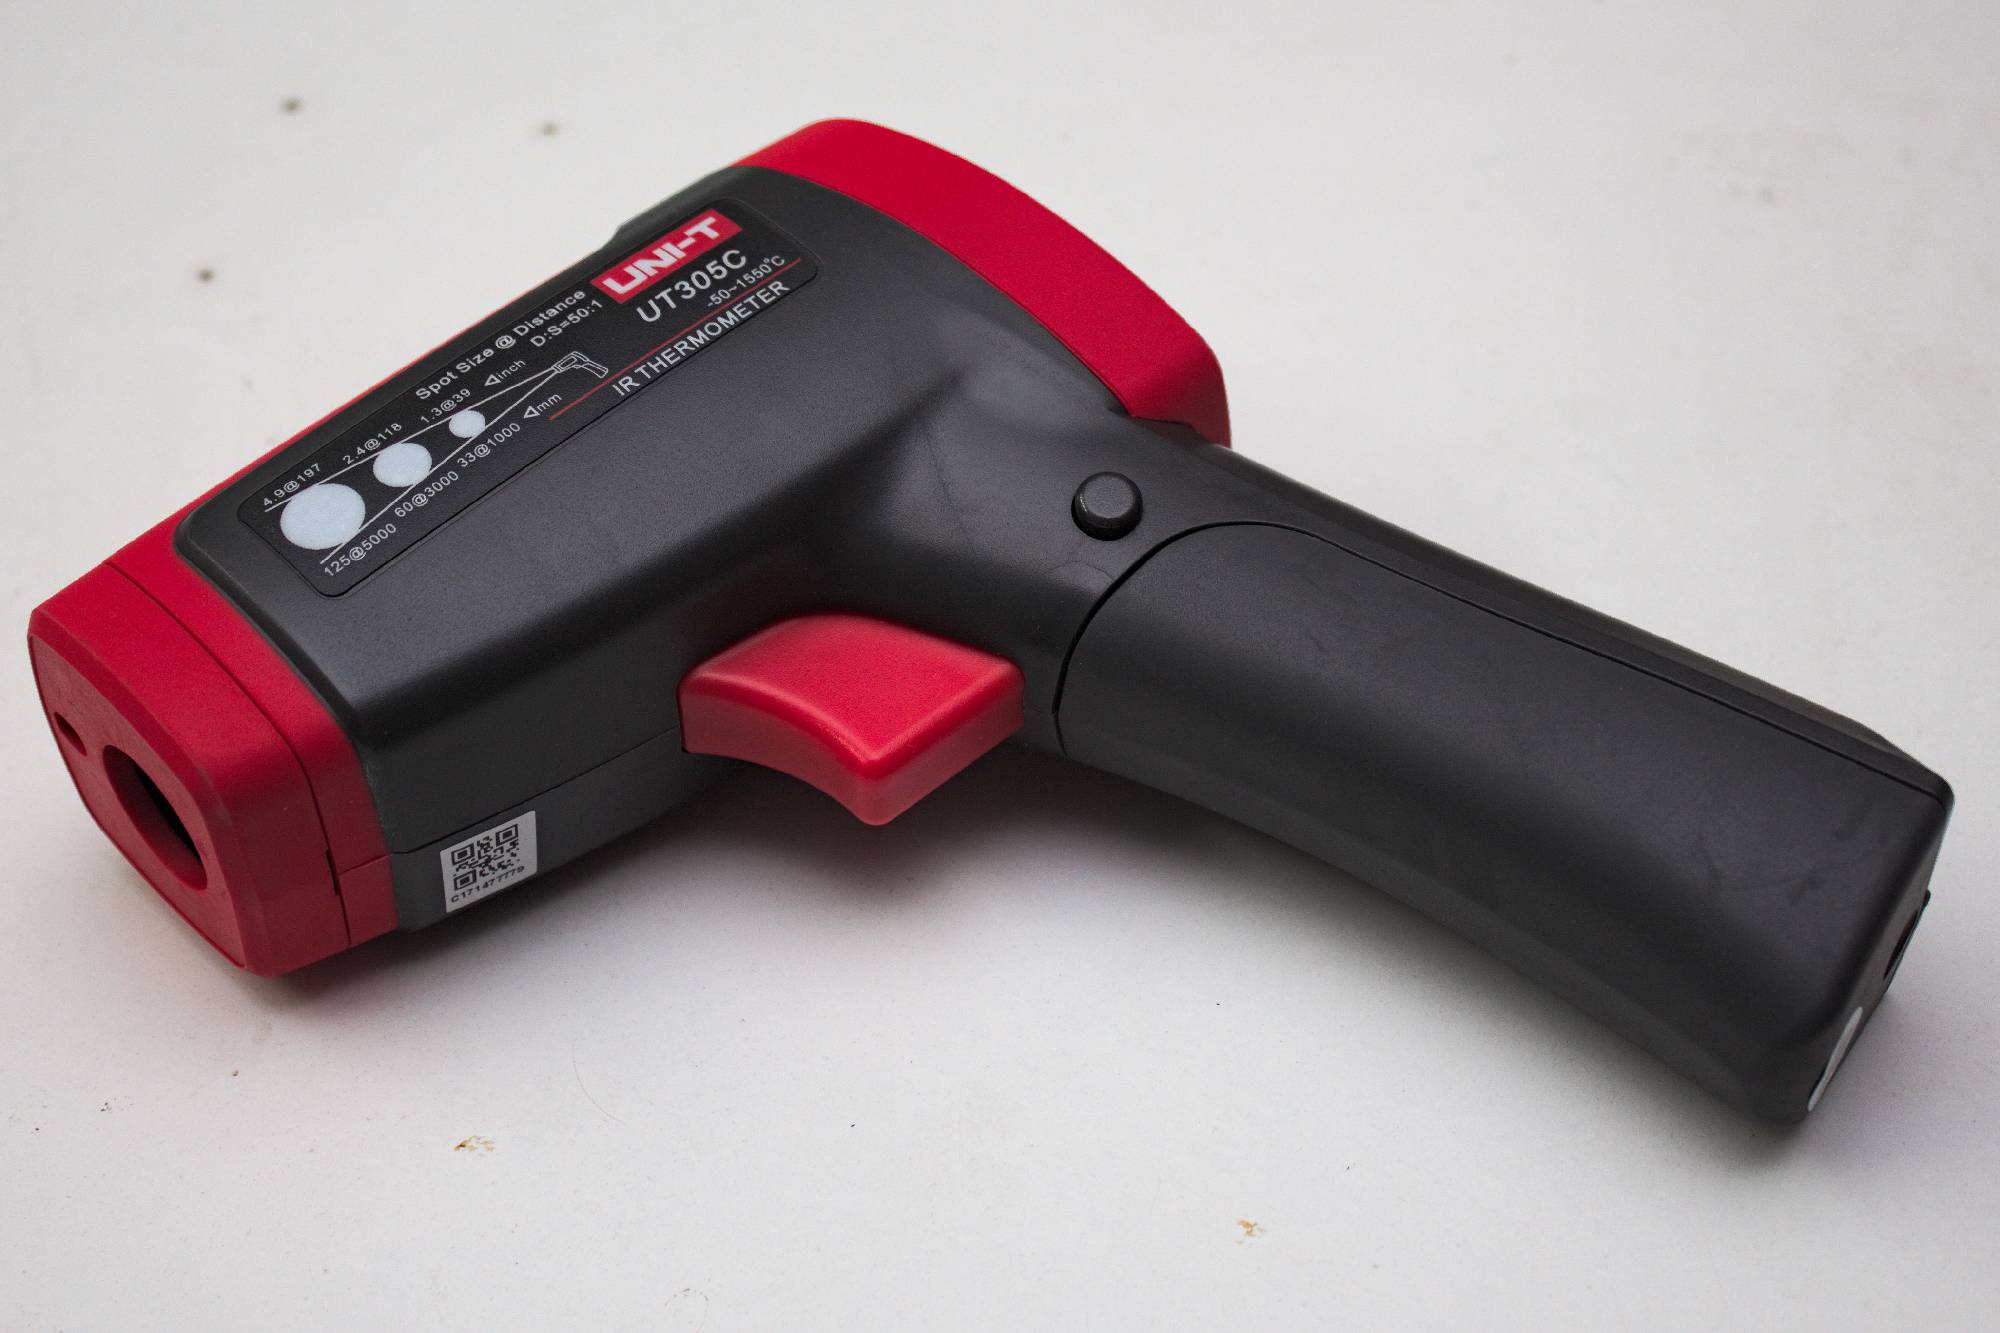 A UNI-T handheld non-contact infrared thermometer